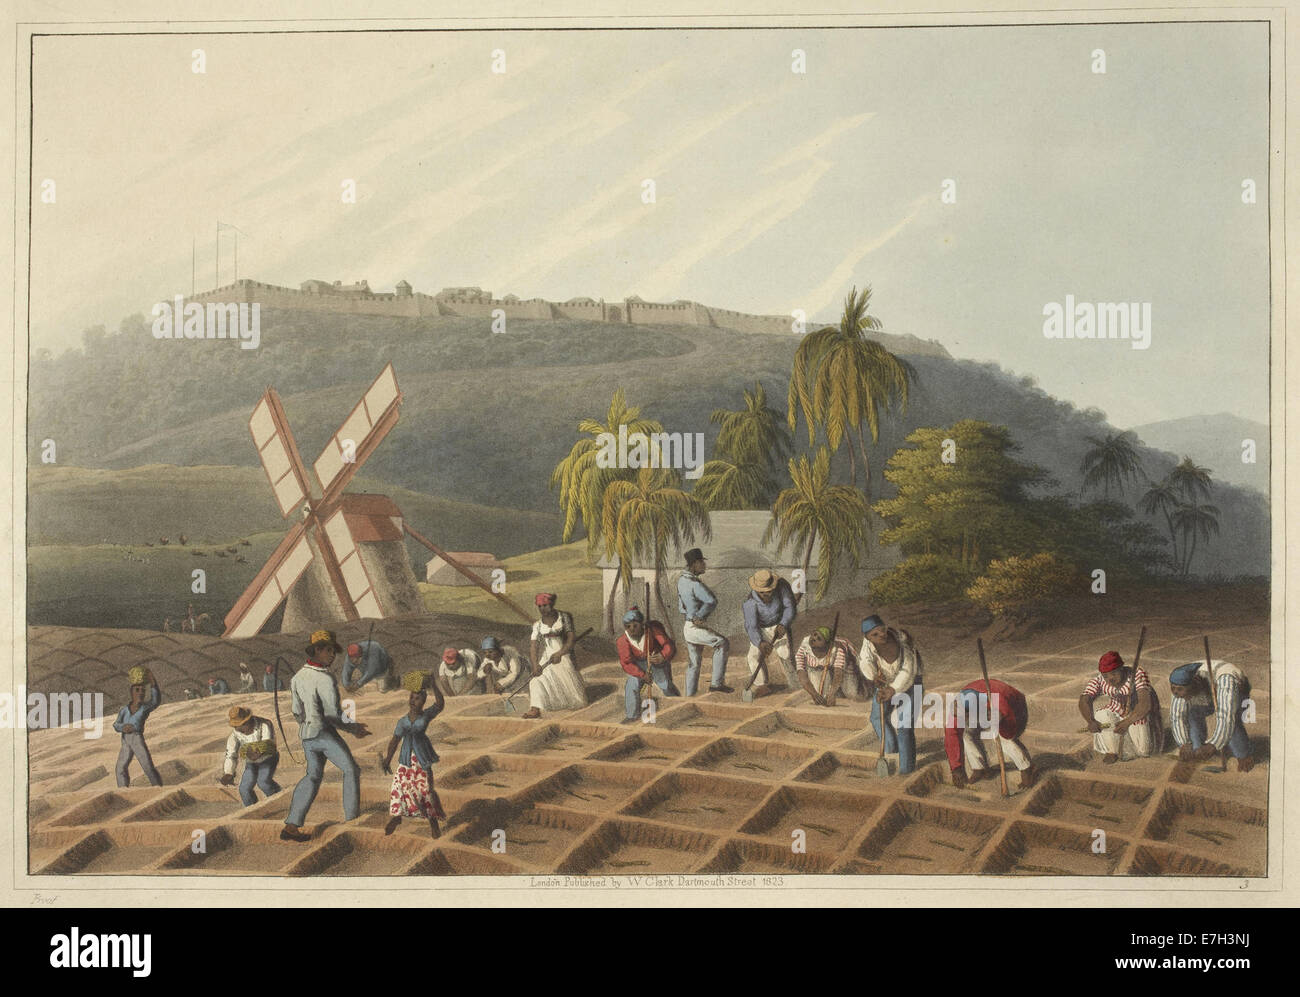 Slaves working on a plantation - Ten Views in the Island of Antigua (1823), plate III - BL Stock Photo